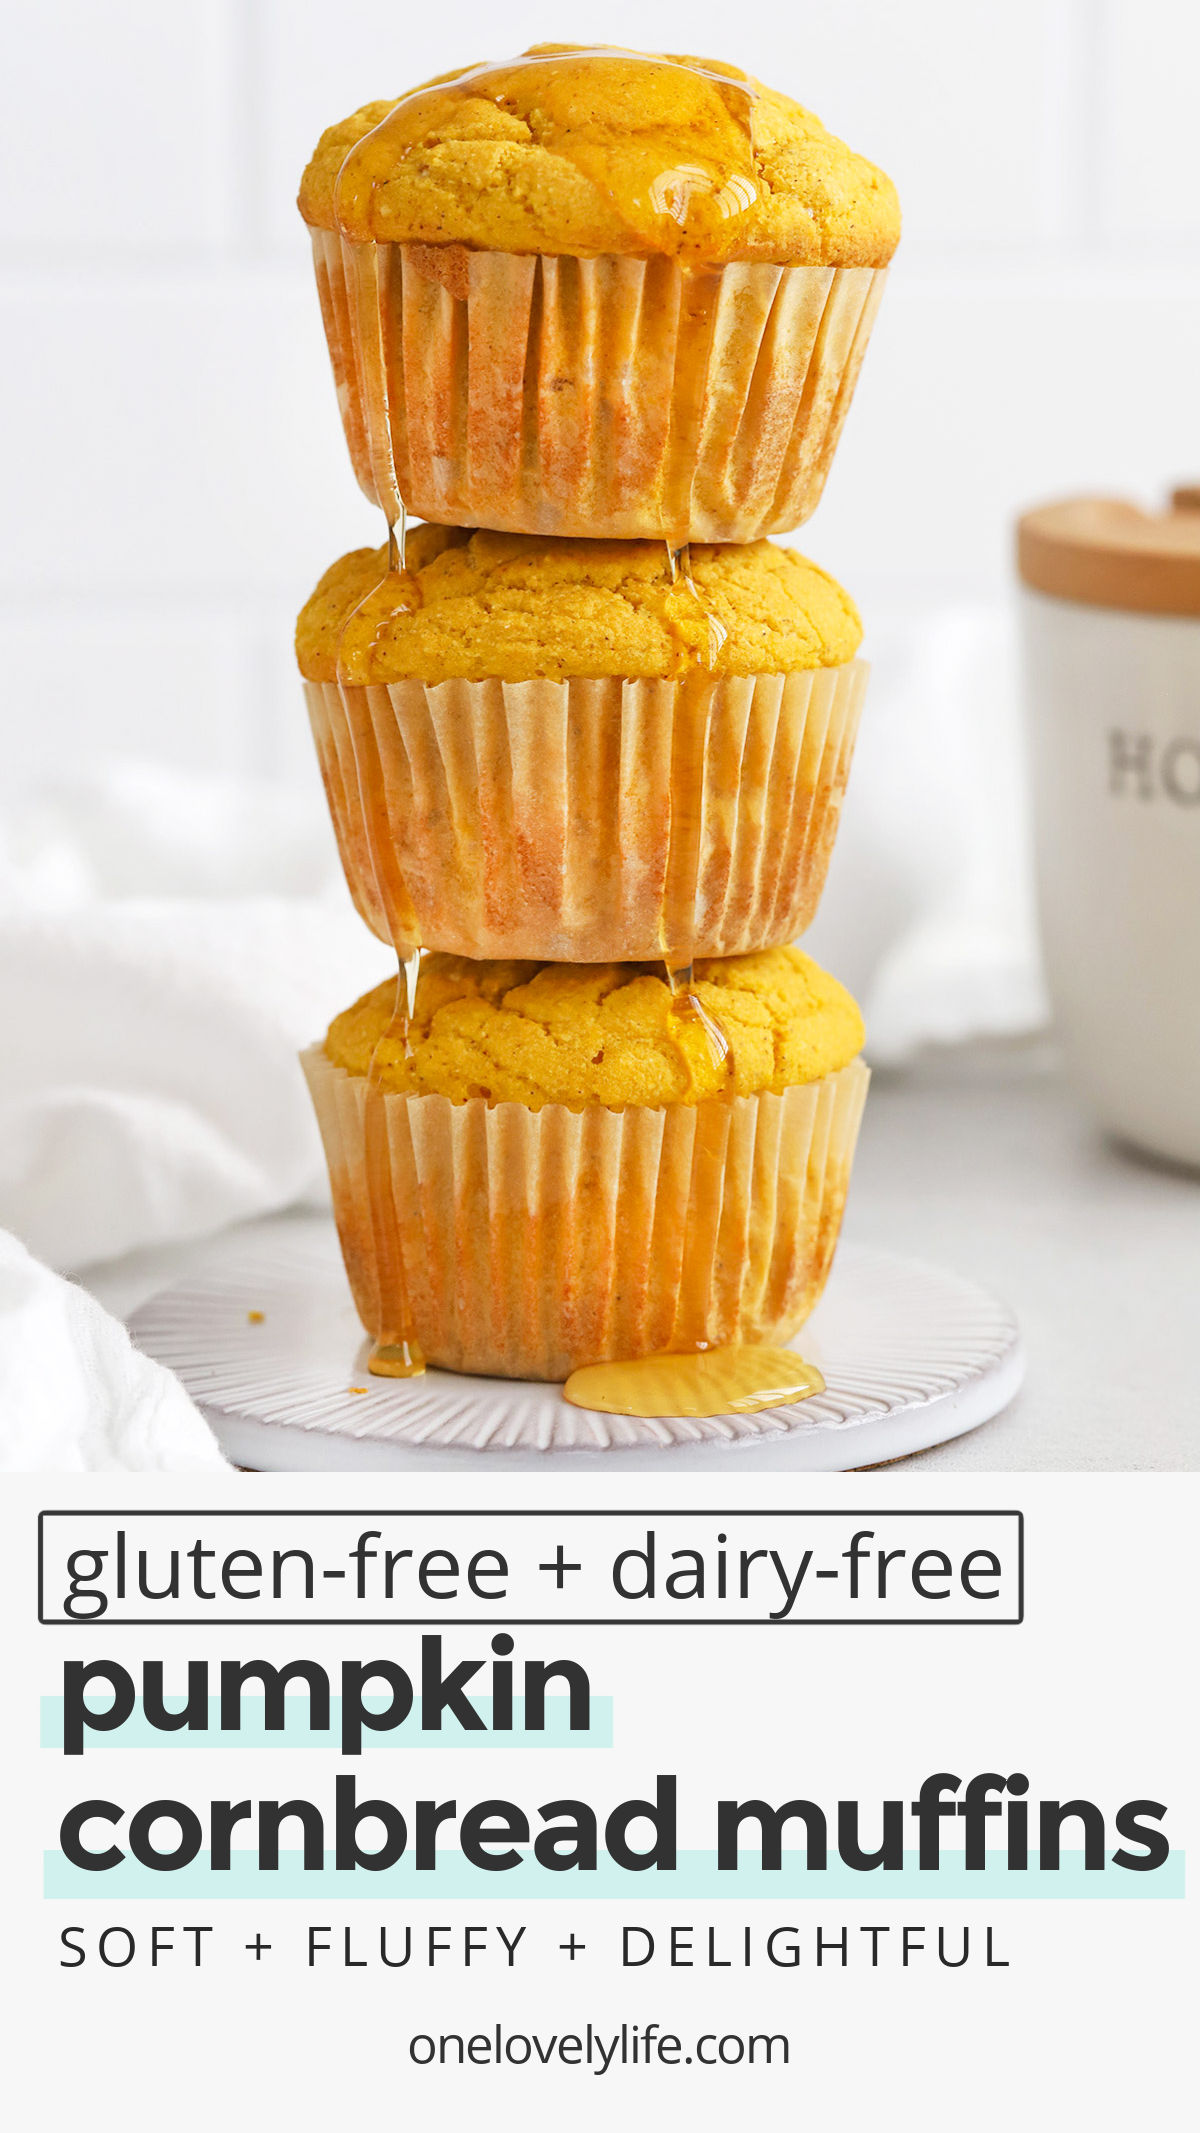 Gluten-Free Pumpkin Cornbread Muffins - These light, fluffy pumpkin cornbread muffins are an all-time favorite. The perfect cozy accompaniment to chilis, soups, salads, and more! (Gluten & Dairy Free) // cornbread muffins // gluten free cornbread muffins // pumpkin cornbread recipe // #glutenfree #dairyfree #cornbread #cornbreadmuffins #pumpkin #pumpkinmuffins